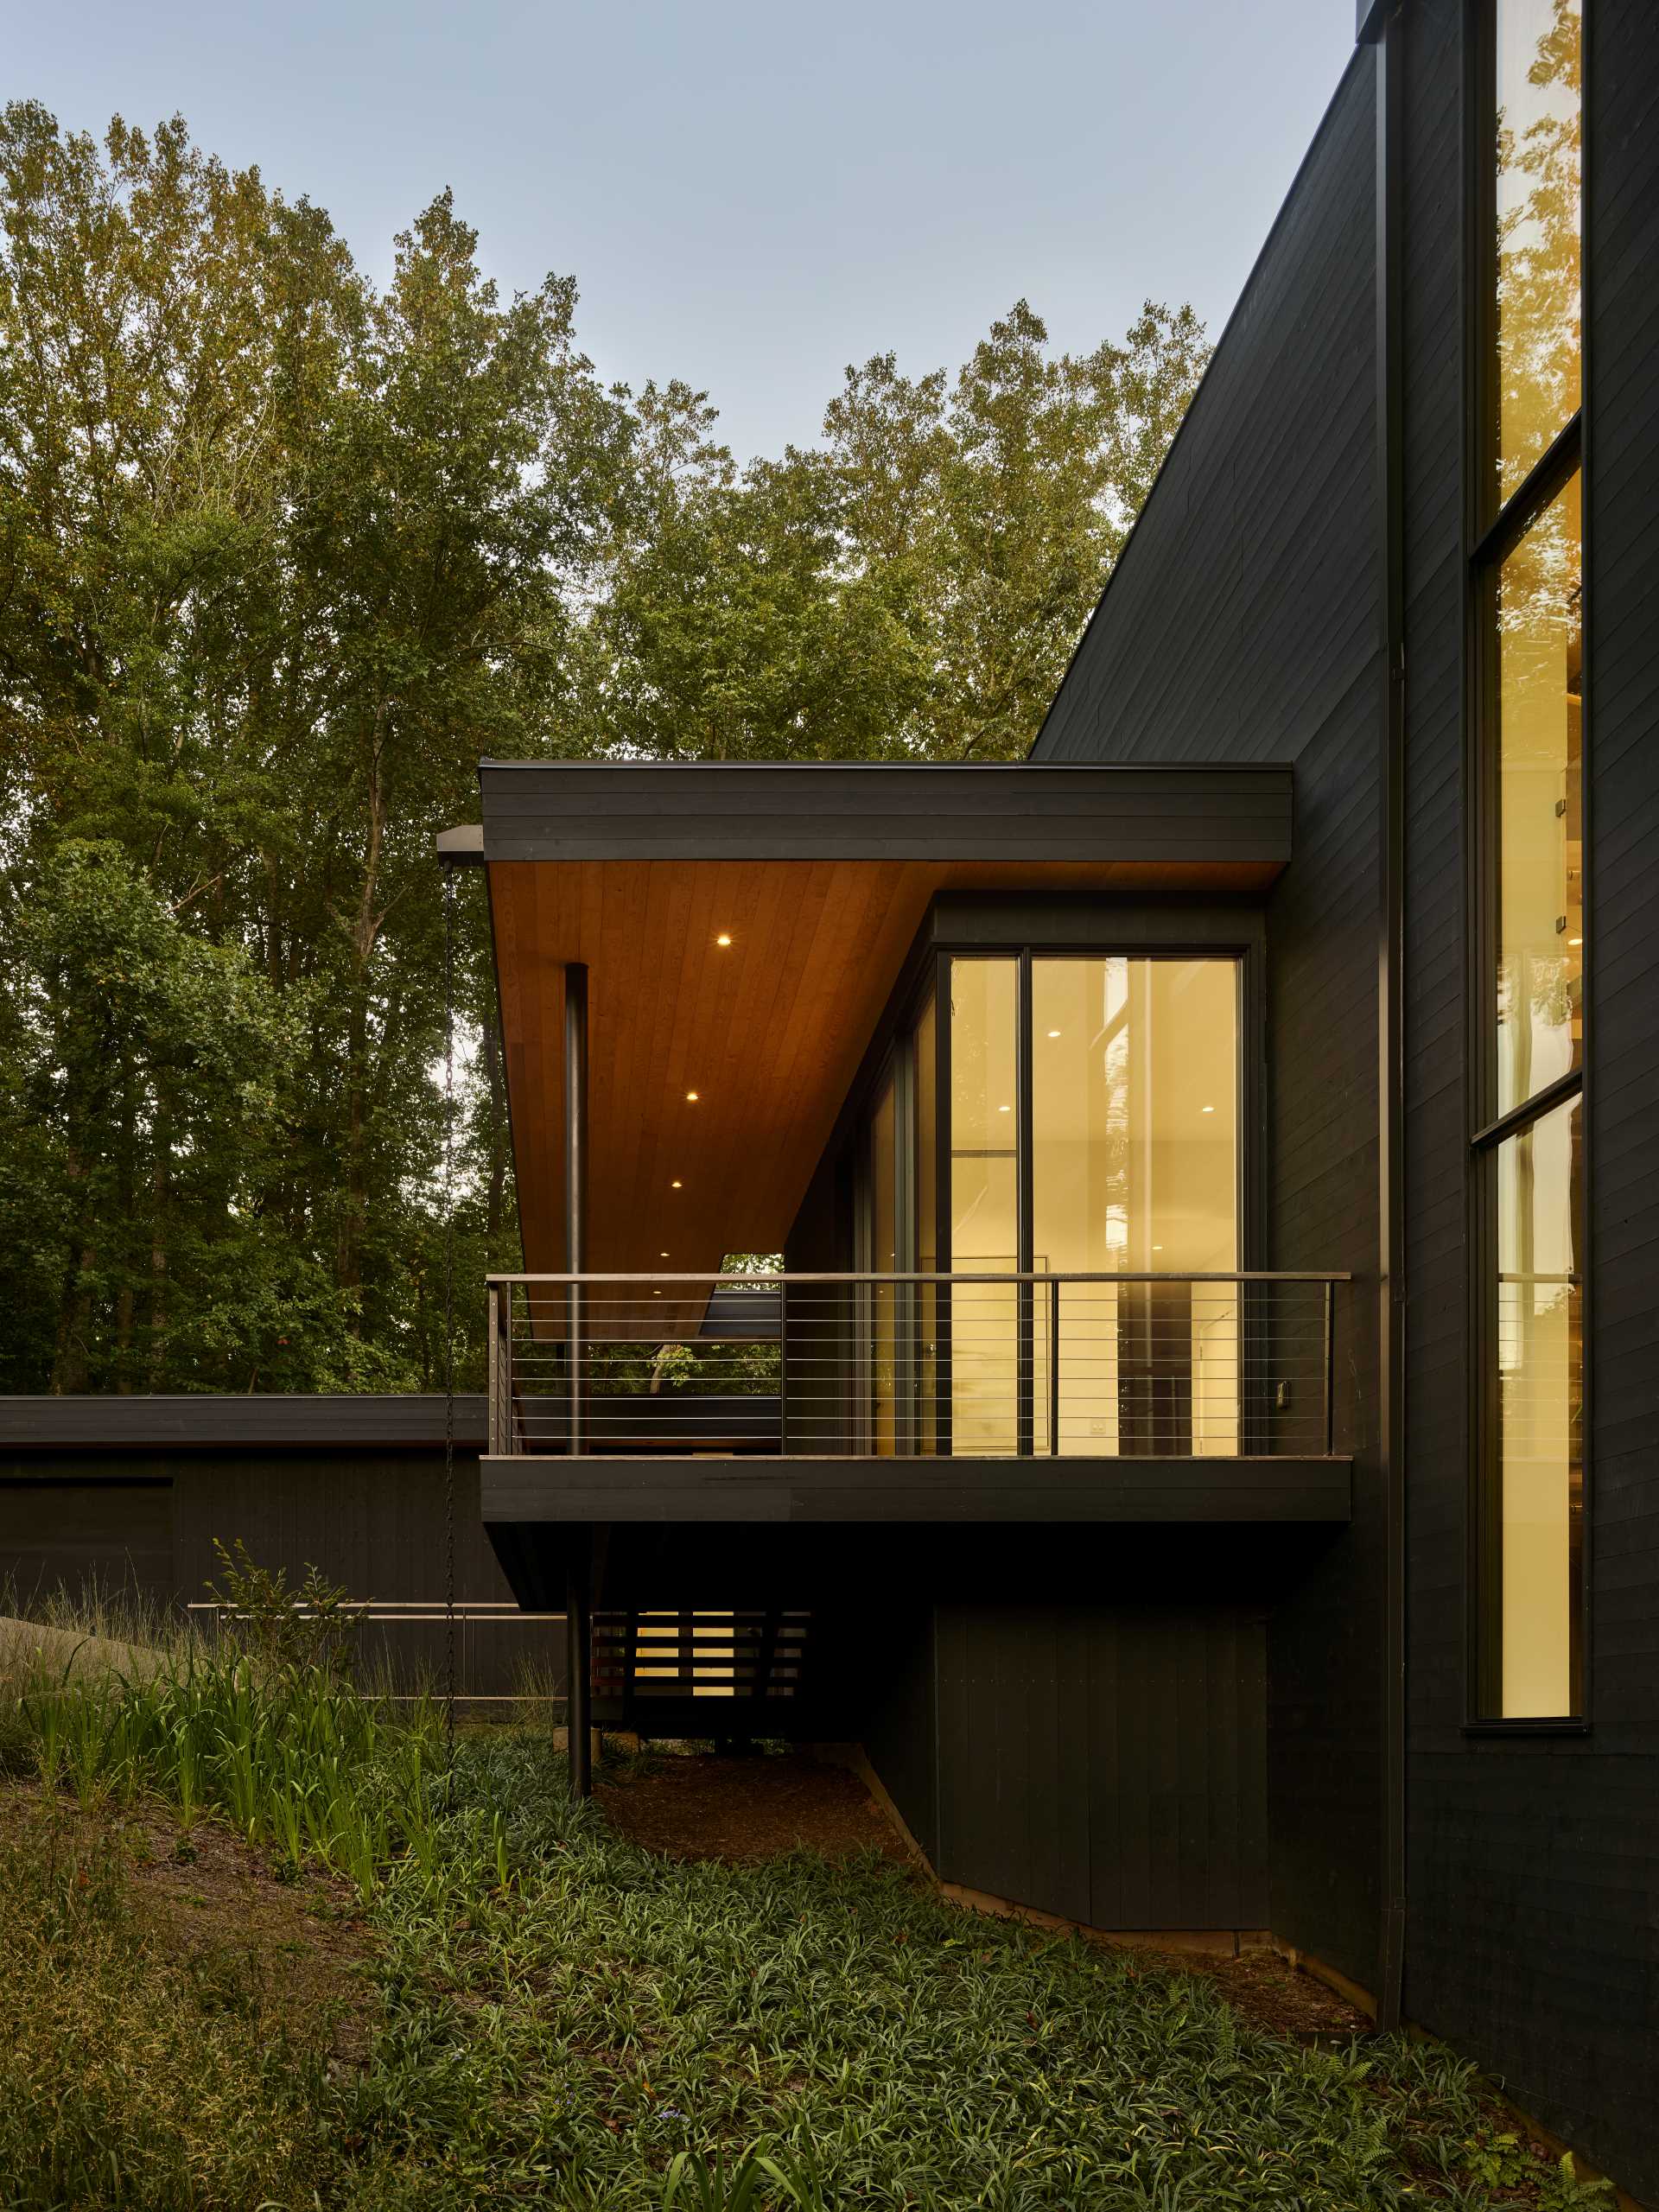 A modern home with a covered walkway to the front door.